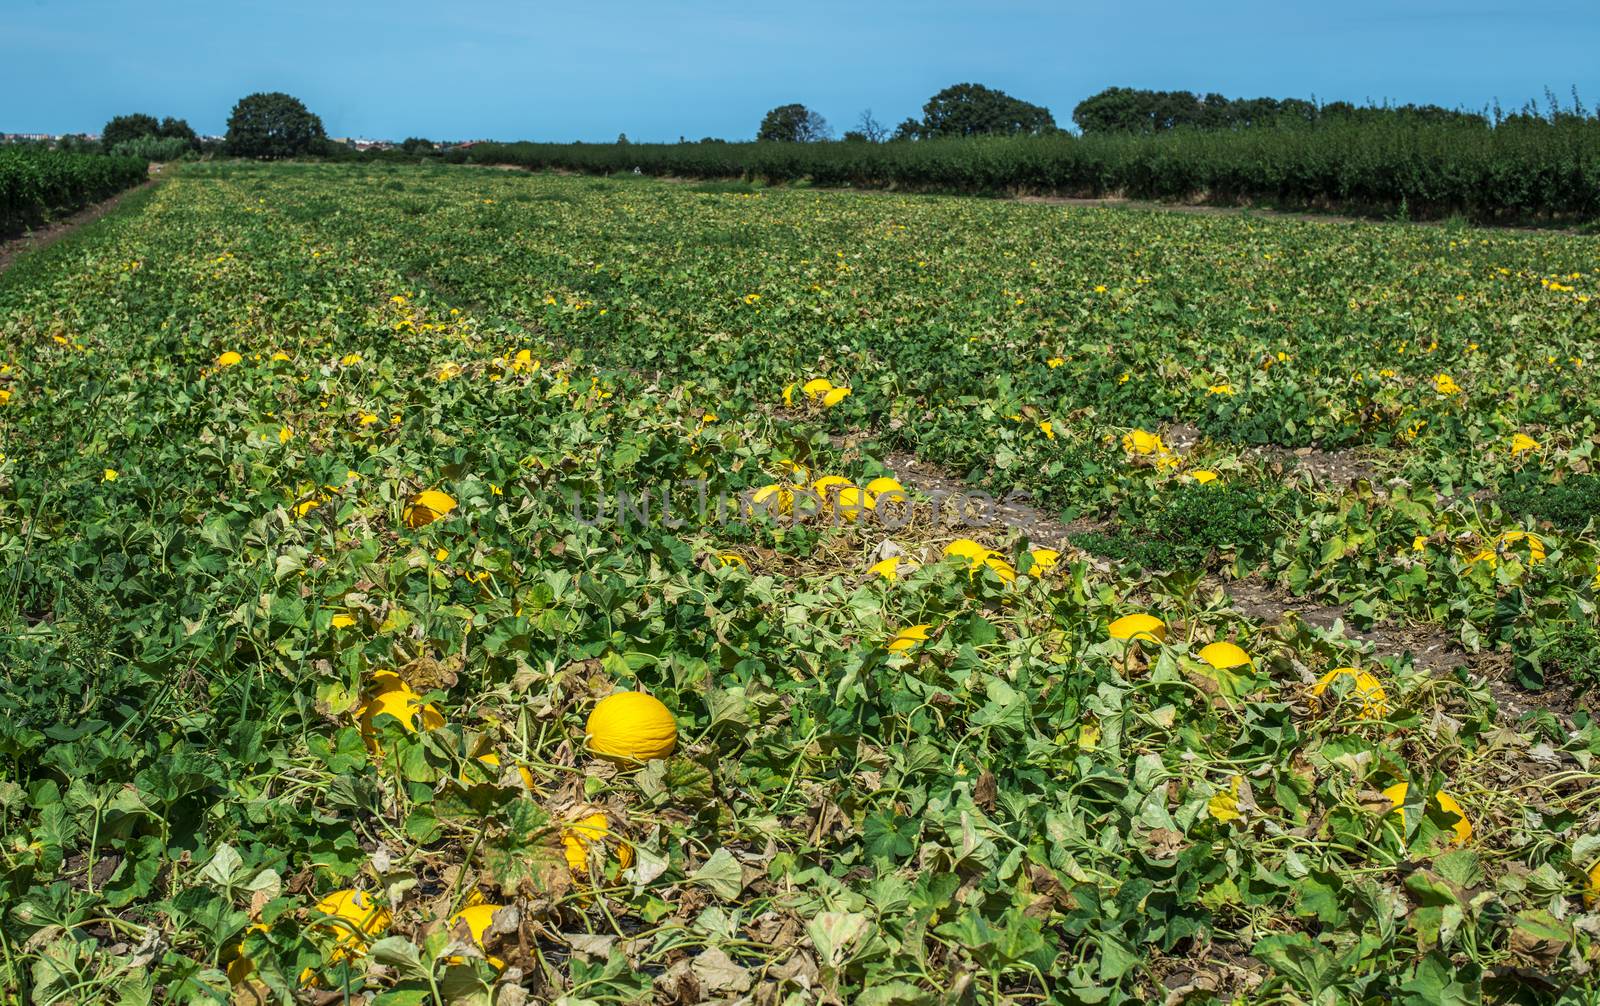 Melons in the field. Sunny day. Plantation with yellow melons in by deyan_georgiev